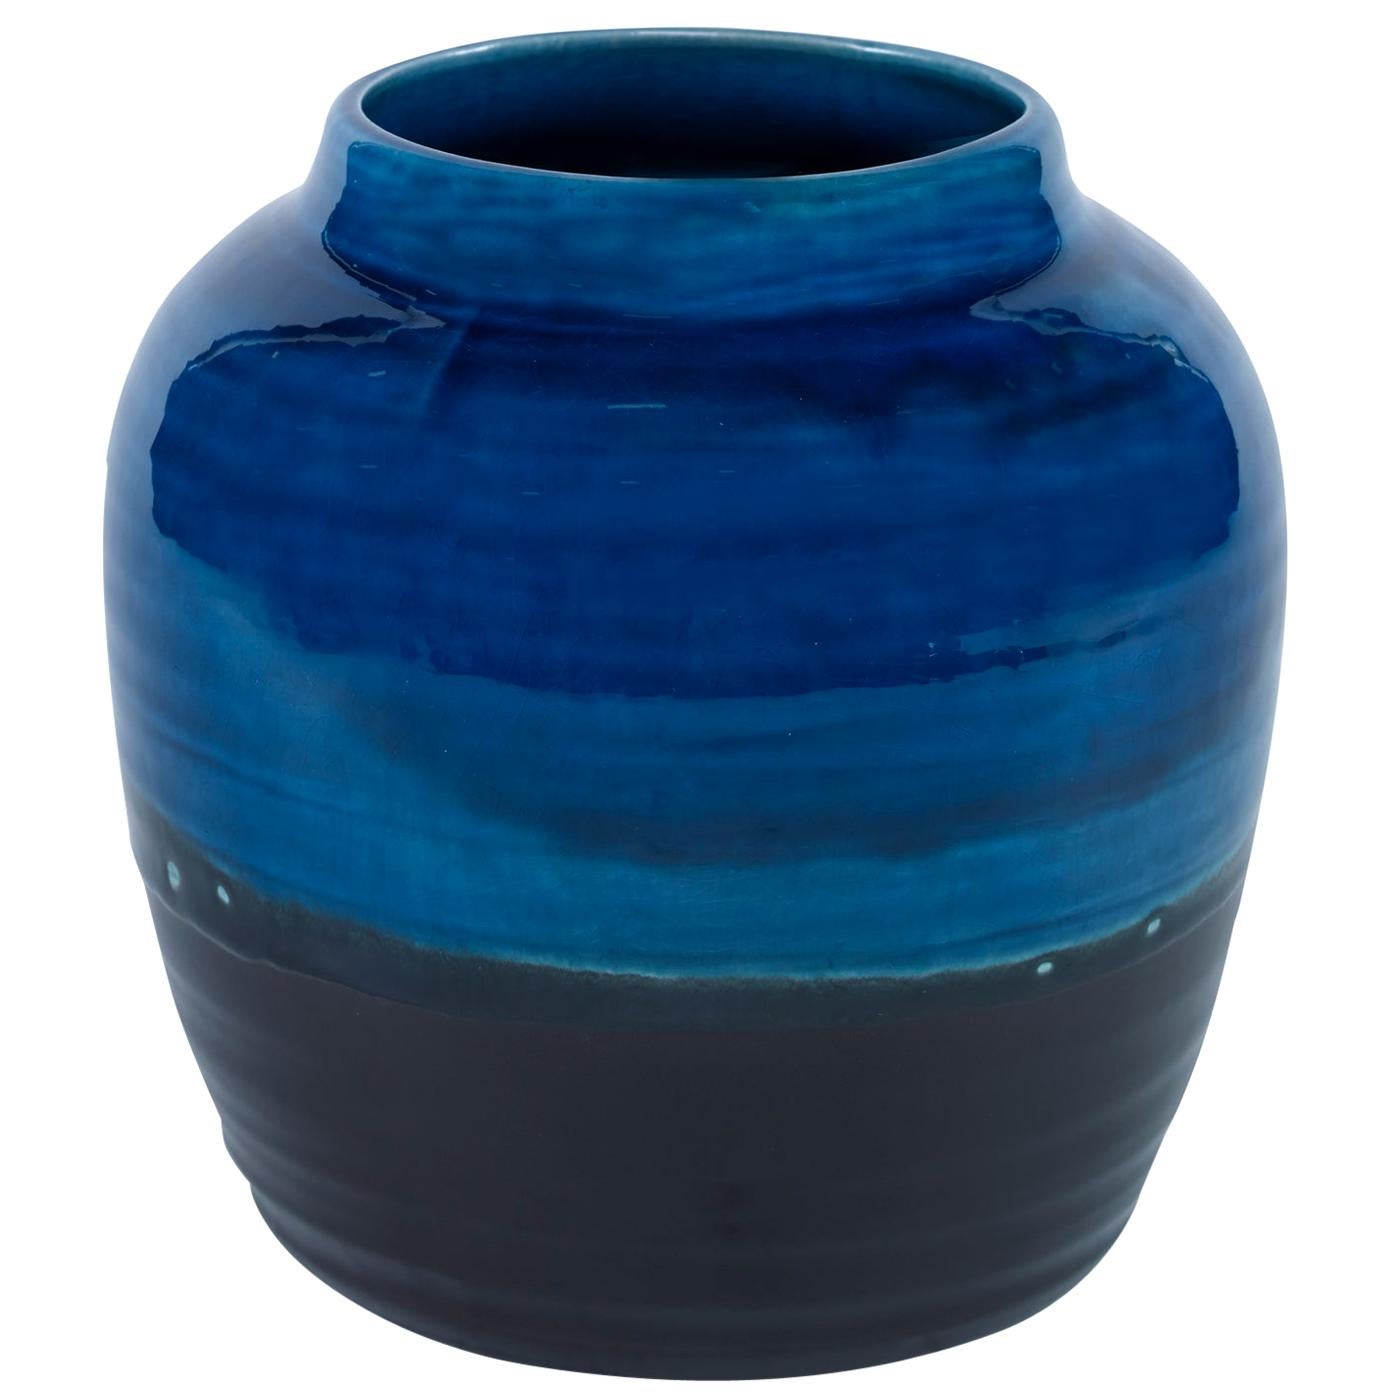 Aries Small Vase in Black and Blue Ceramic by CuratedKravet